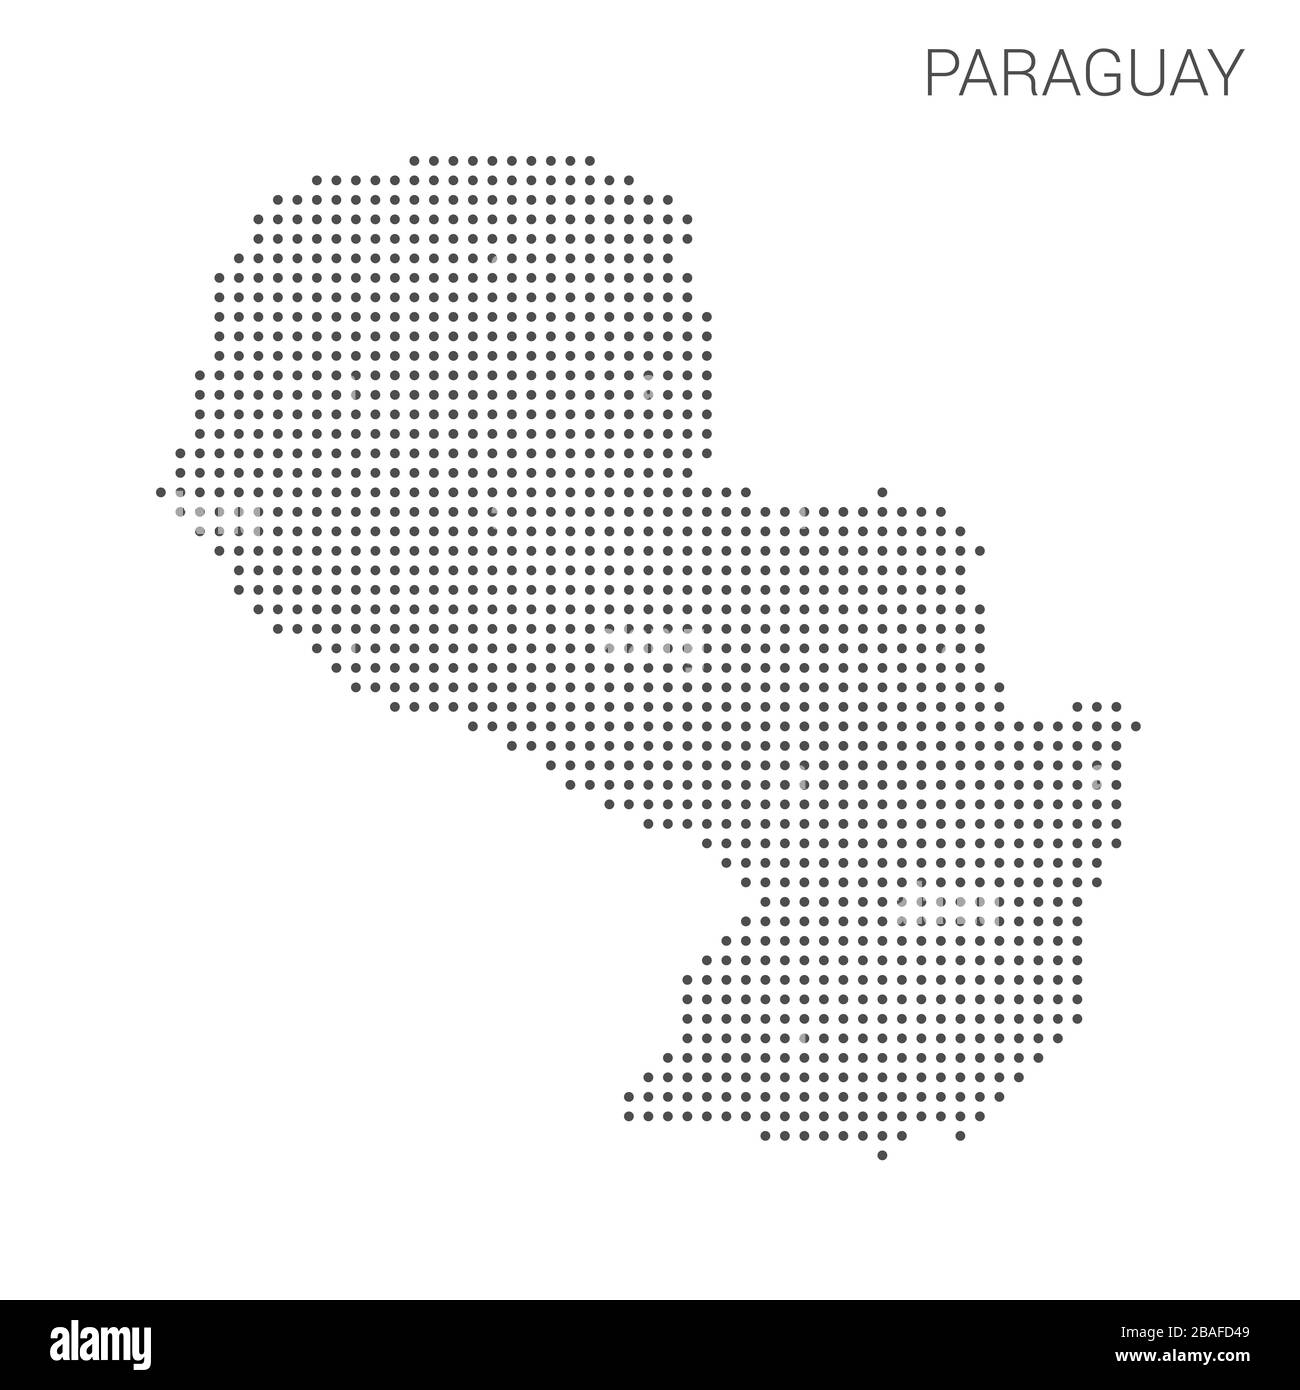 Paraguay map dotted on white background vector isolated. Illustration for technology design or infographics. Isolated on white background. Travel vect Stock Vector